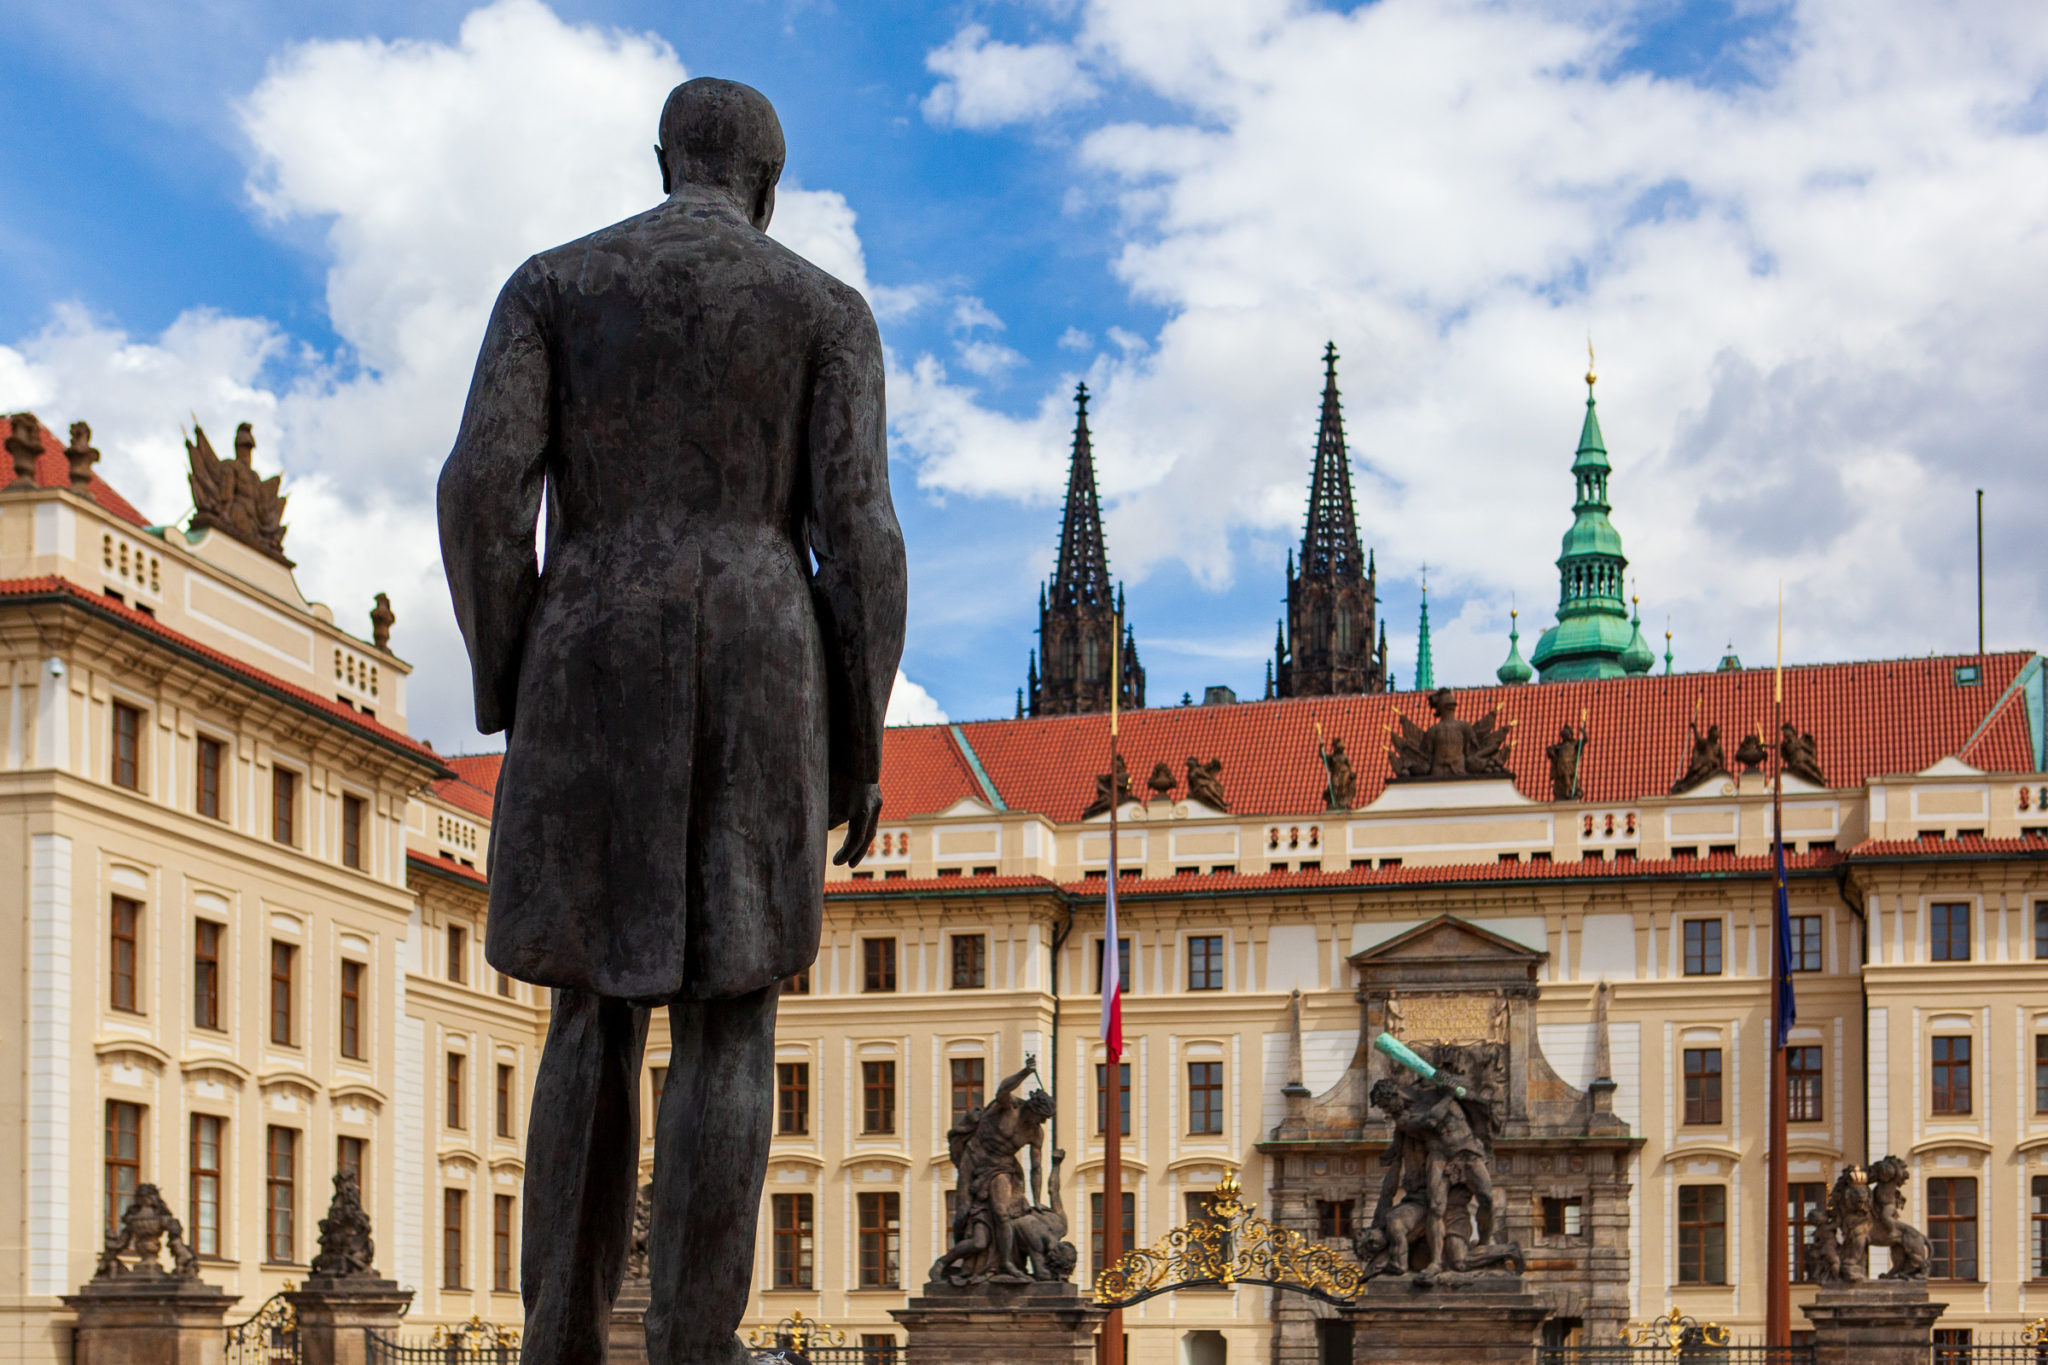 The T. G. Masaryk statue in front of the Prague Castle